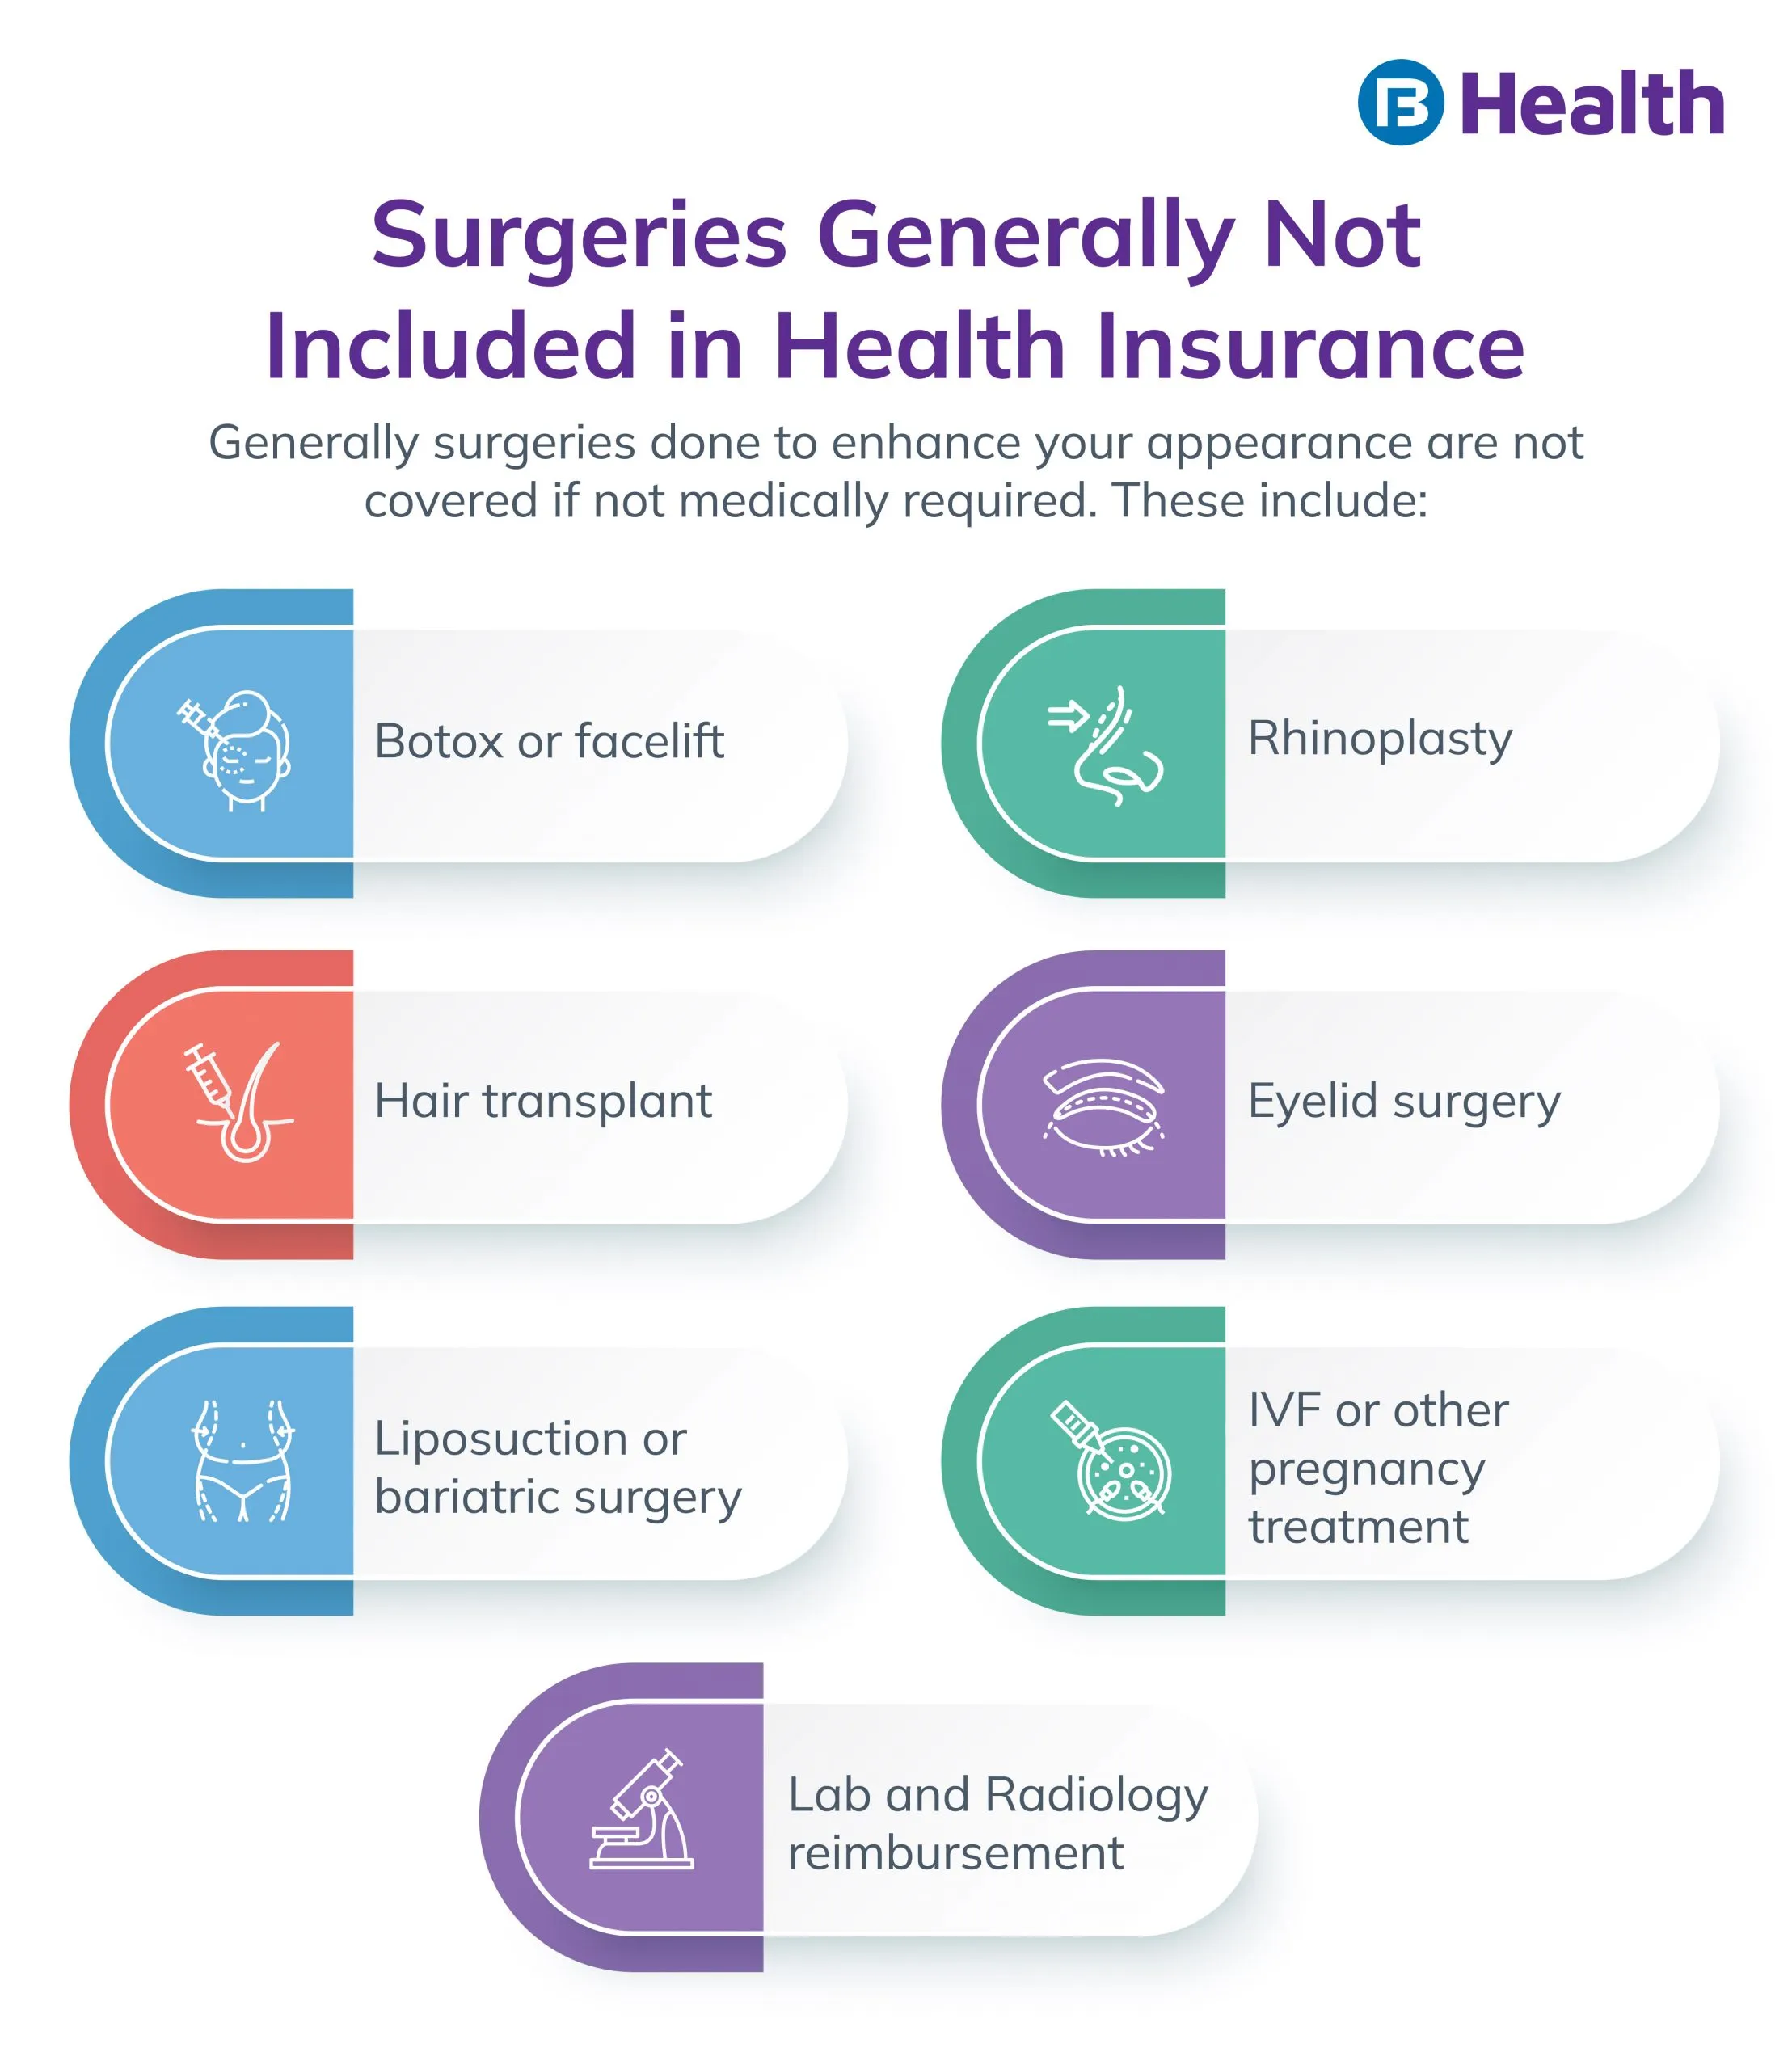 Surgeries not included in health insurance